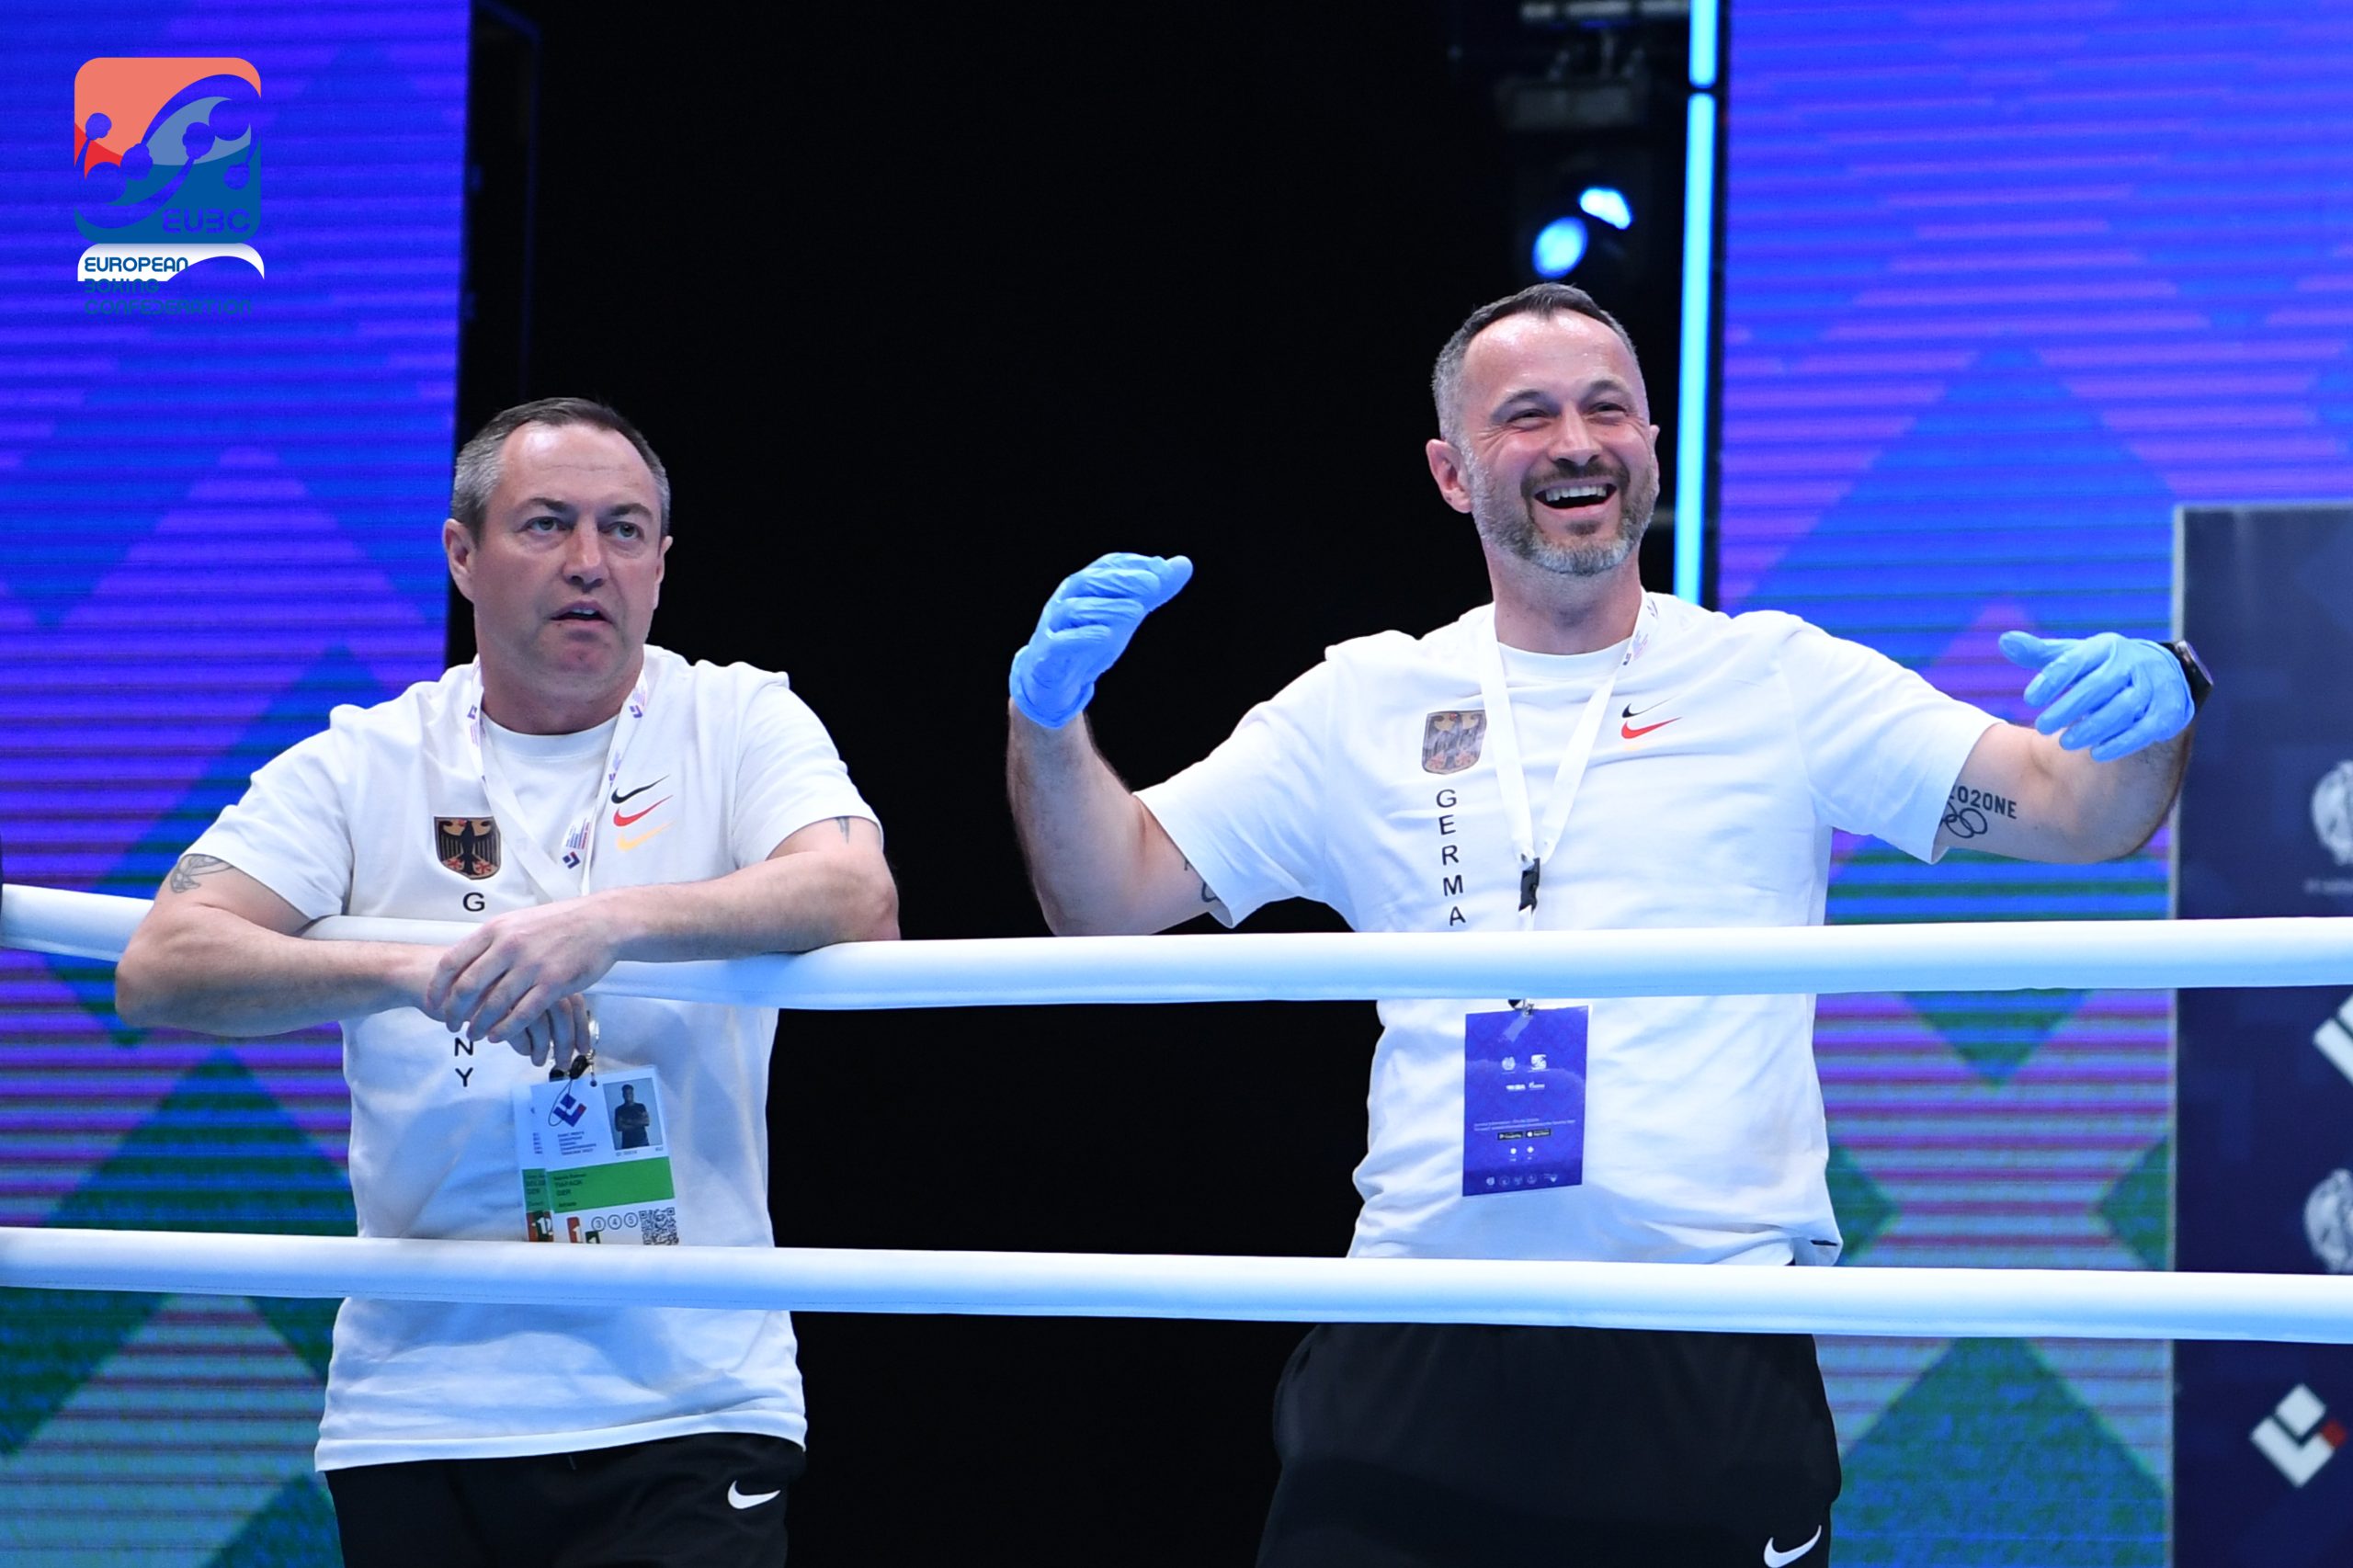 Kloetzer and Tiafack are dreaming about Olympic medals for Germany in boxing after 8 years